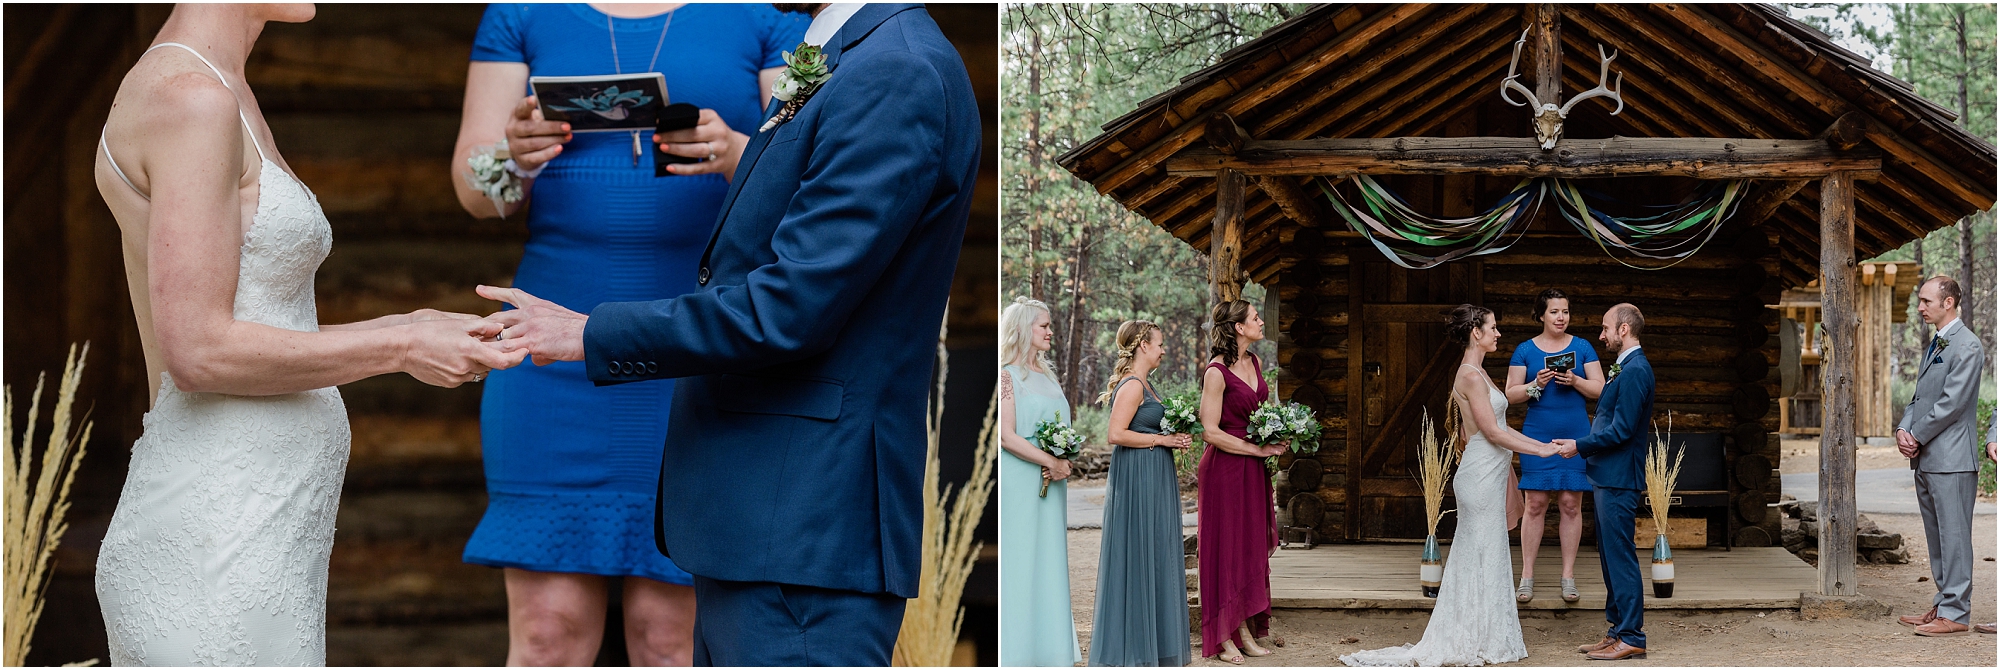 The bride places the groom's titanium band on his finger as she says her vows at the High Desert Museum homestead wedding. | Erica Swantek Photography